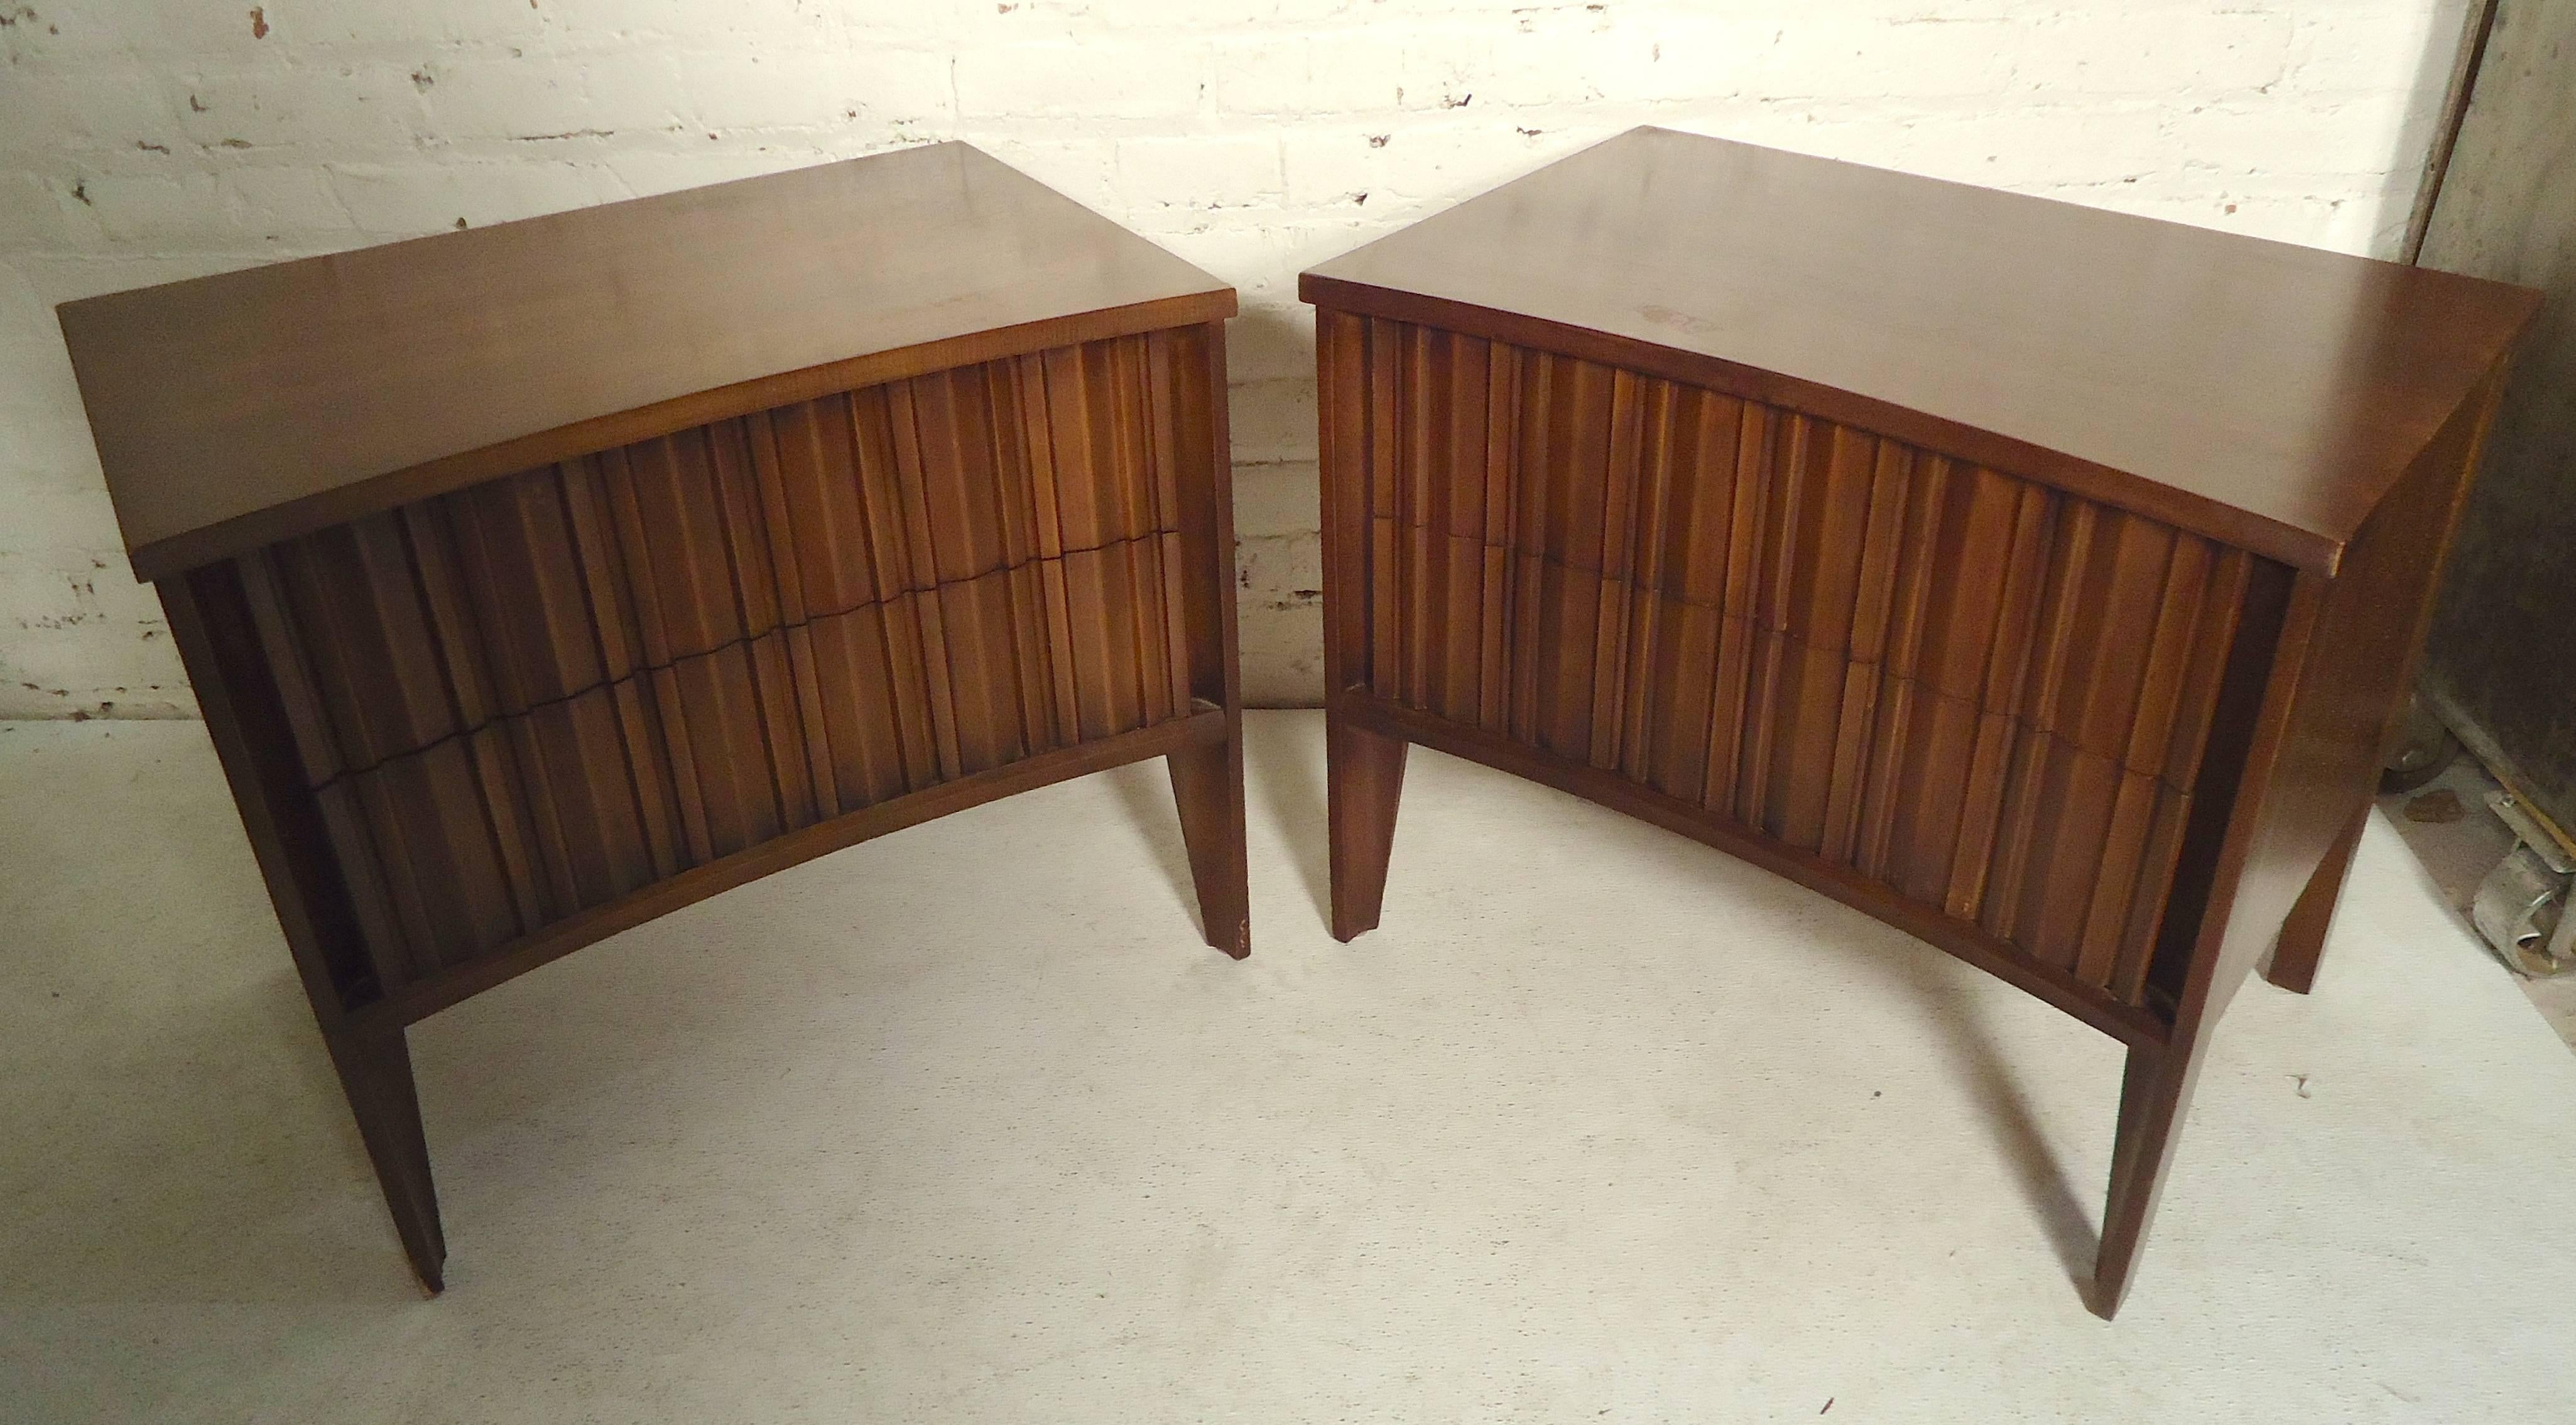 Unique side tables with a curved front and sculpted pattern. Two drawers and tapered legs.

(Please confirm item location - NY or NJ - with dealer).
    